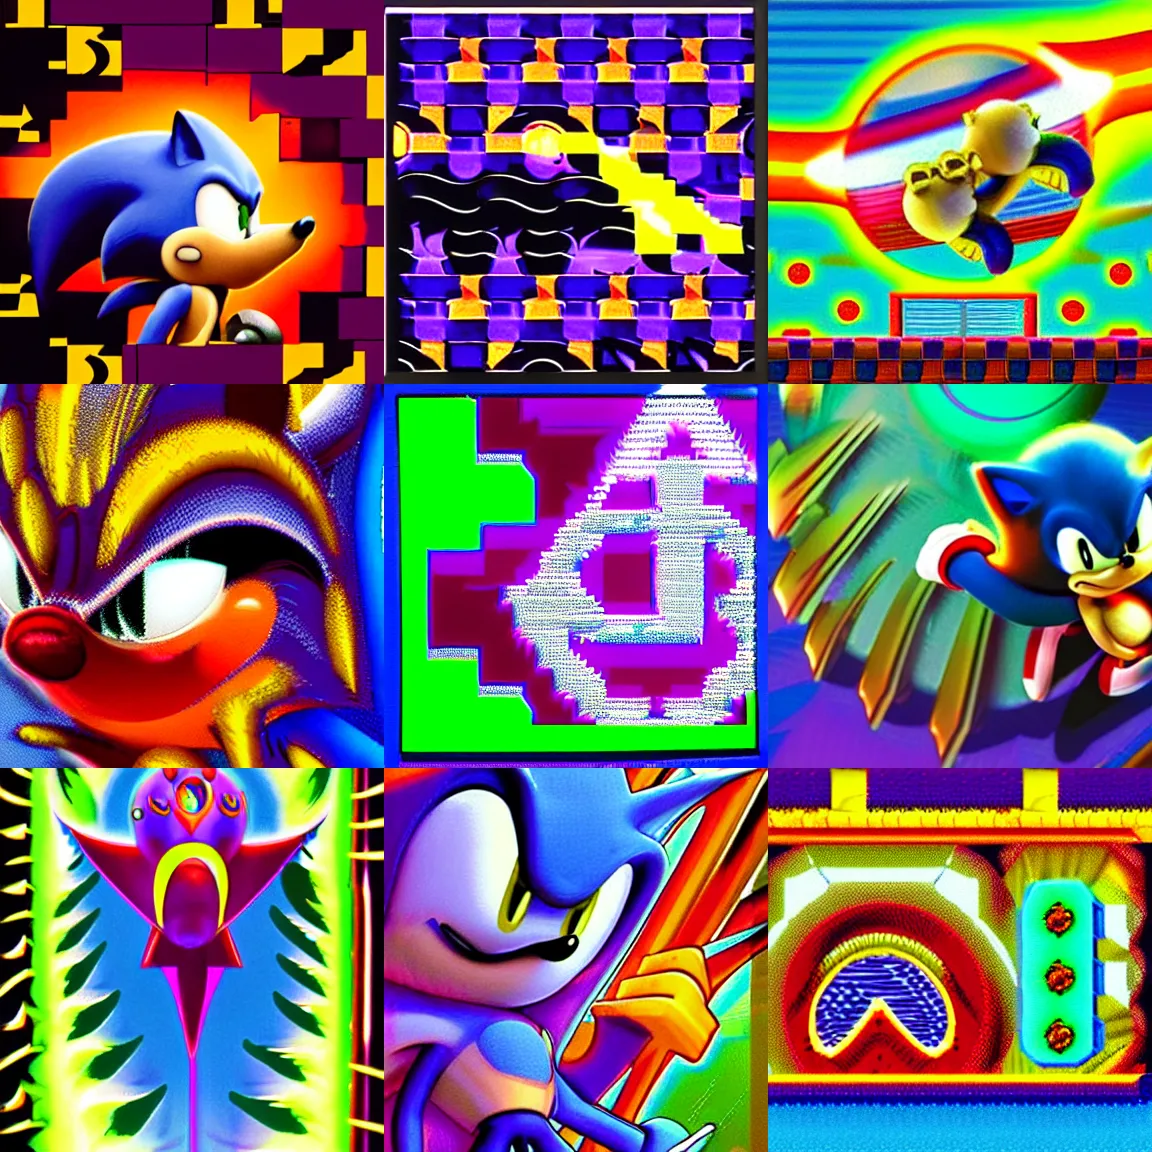 Prompt: sonic the hedgehog in a retro, surreal, faded, sharp, detailed professional, high quality sonic portrait airbrush art mgmt album cover portrait of a liquid dissolving lsd dmt sonic the hedgehog surfing through cyberspace, purple checkerboard background, 1 9 8 0 s 1 9 8 6 sega genesis video game album cover